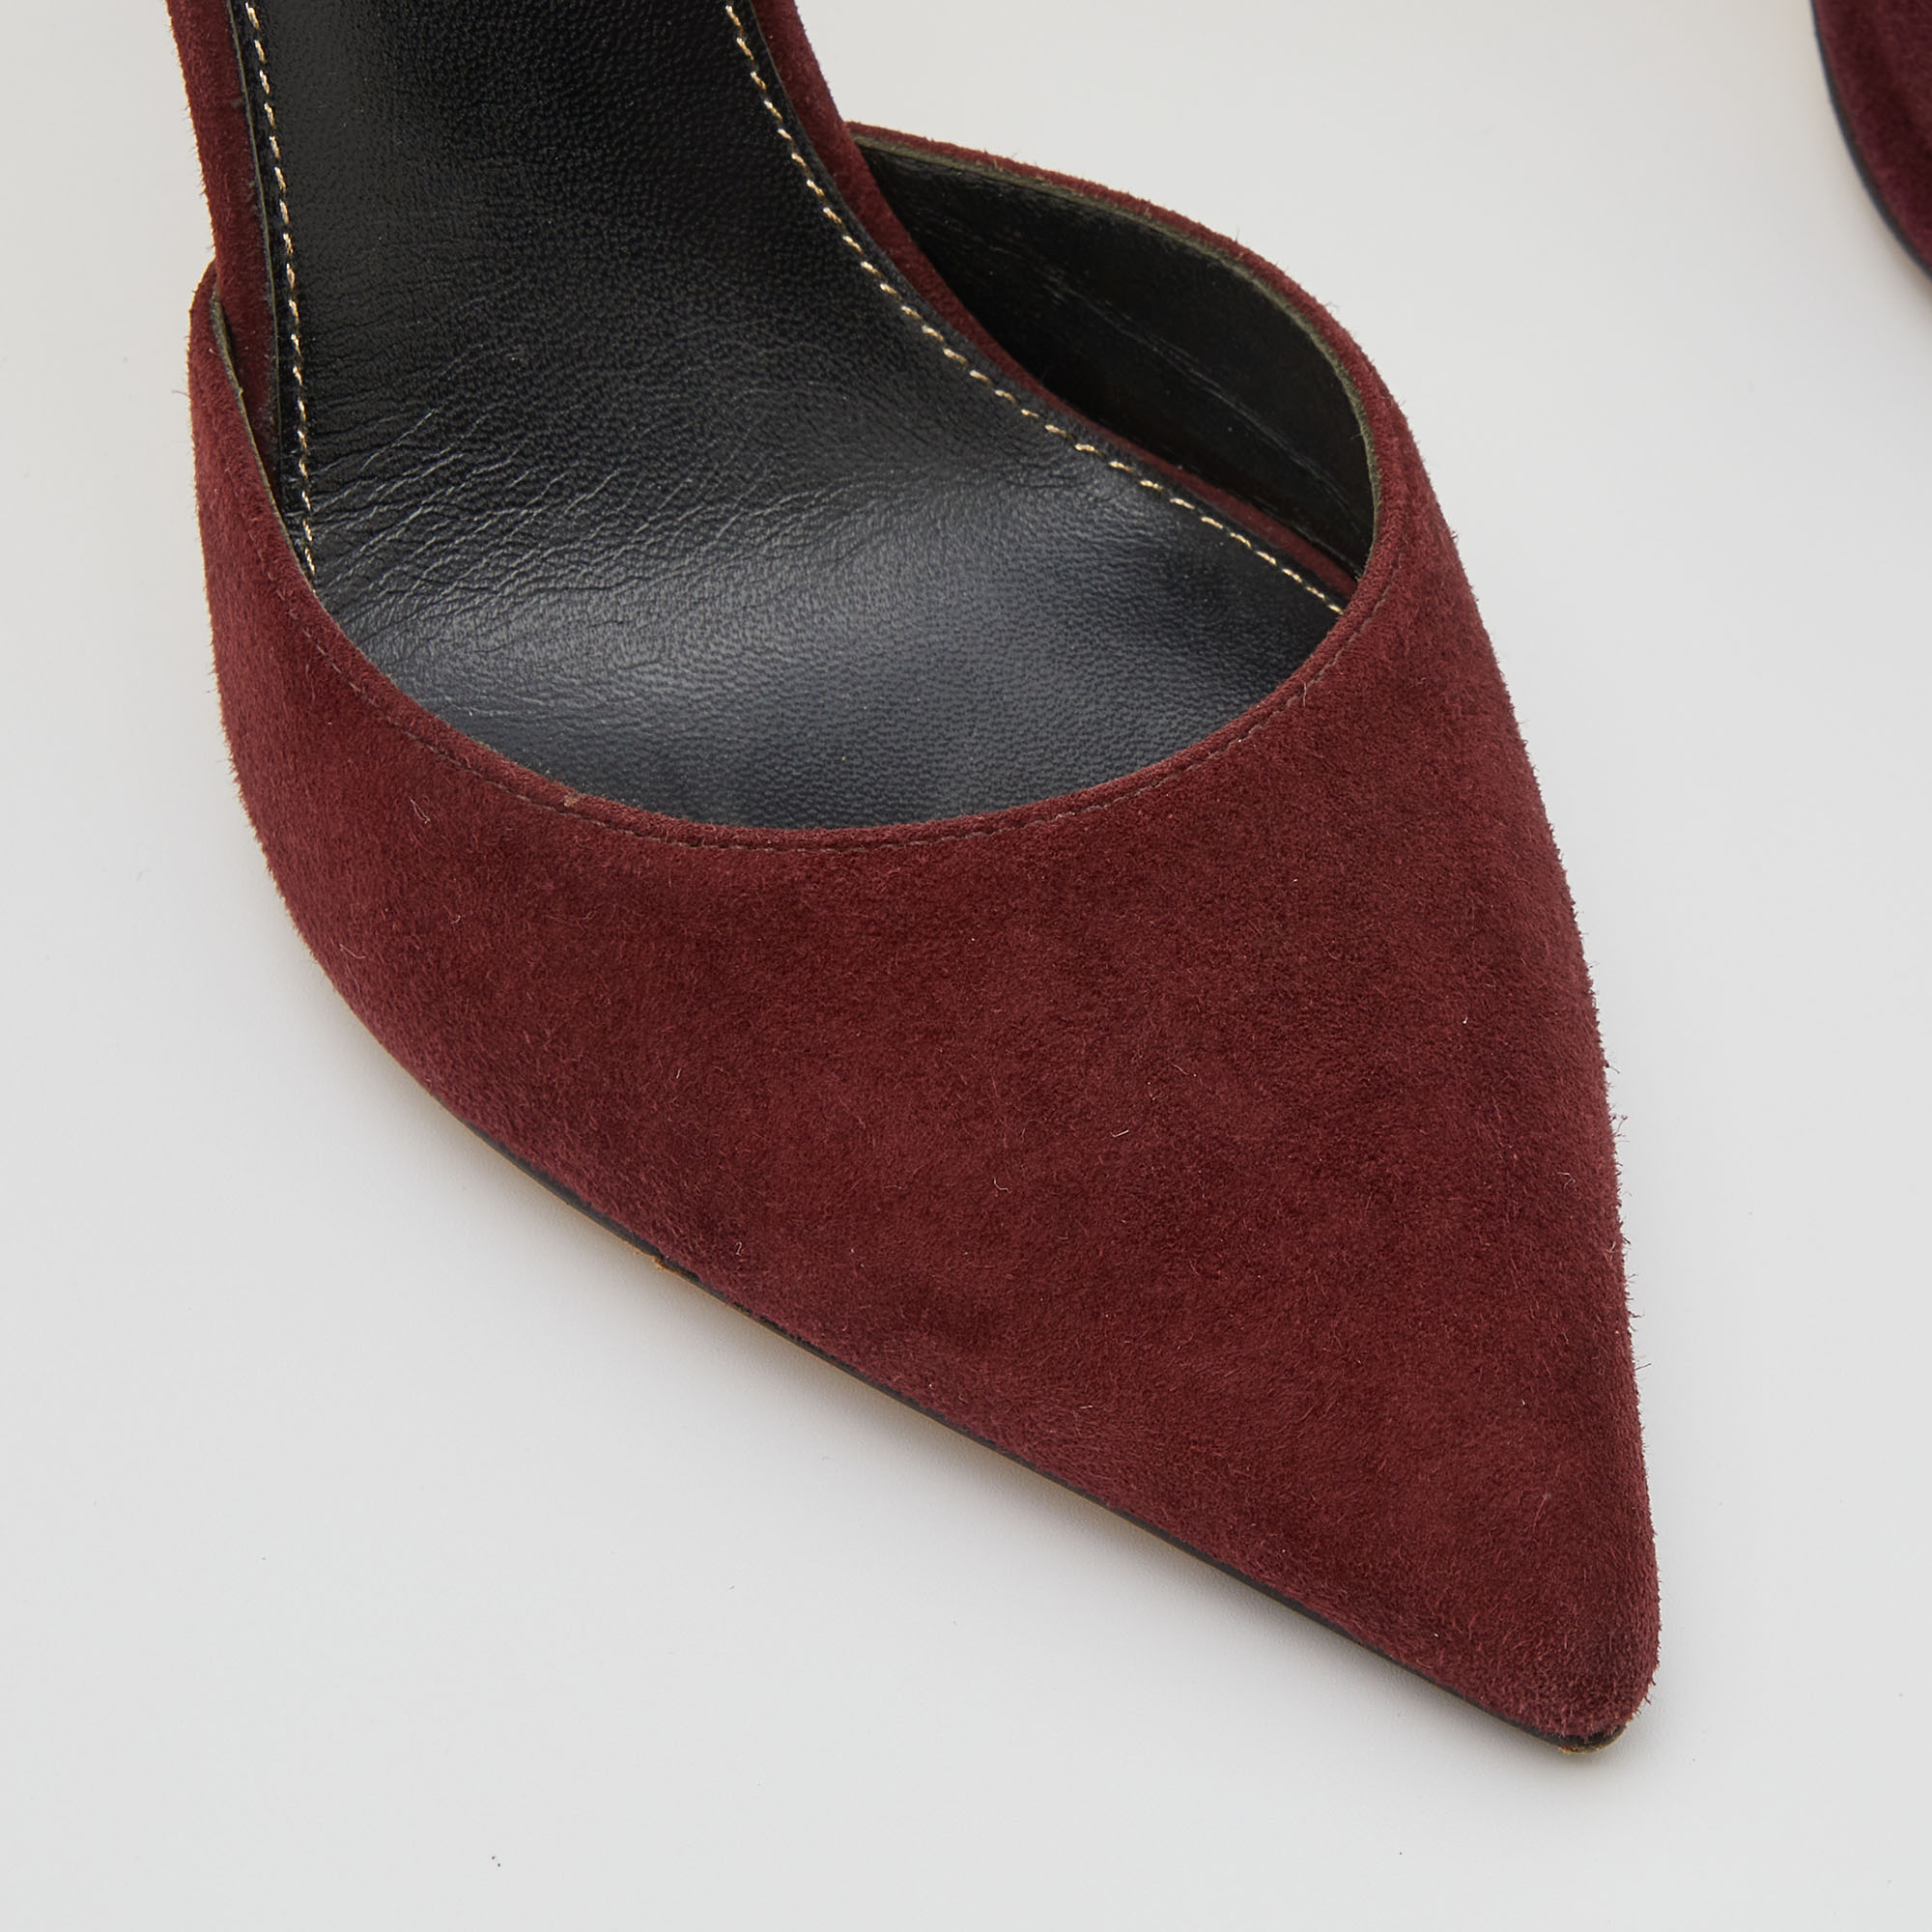 Gianvito Rossi Burgundy Suede Pointed Toe Ankle Strap Sandals Size 37